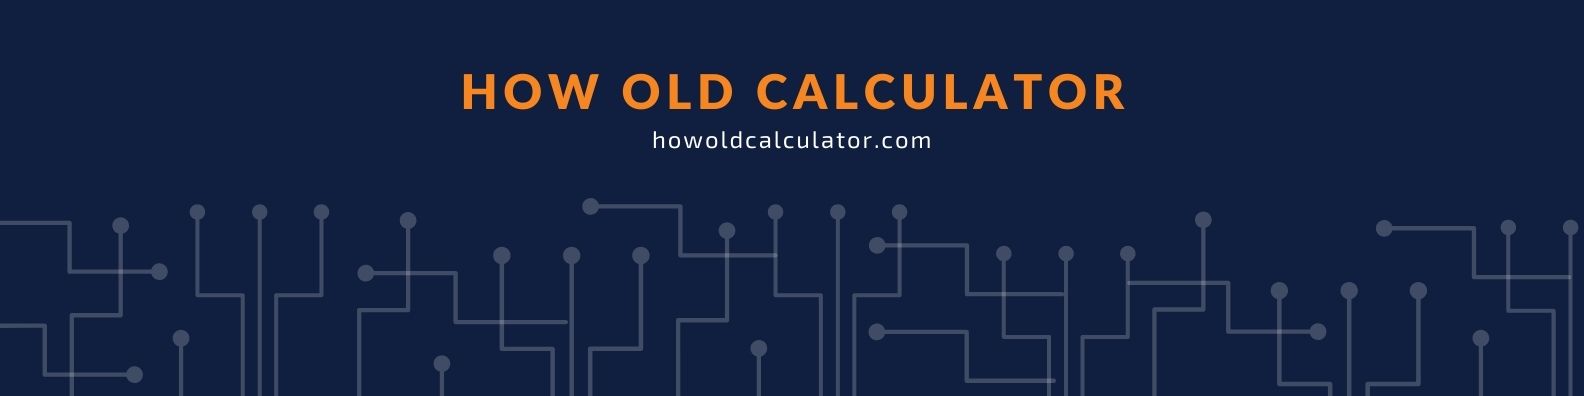 how old calculator